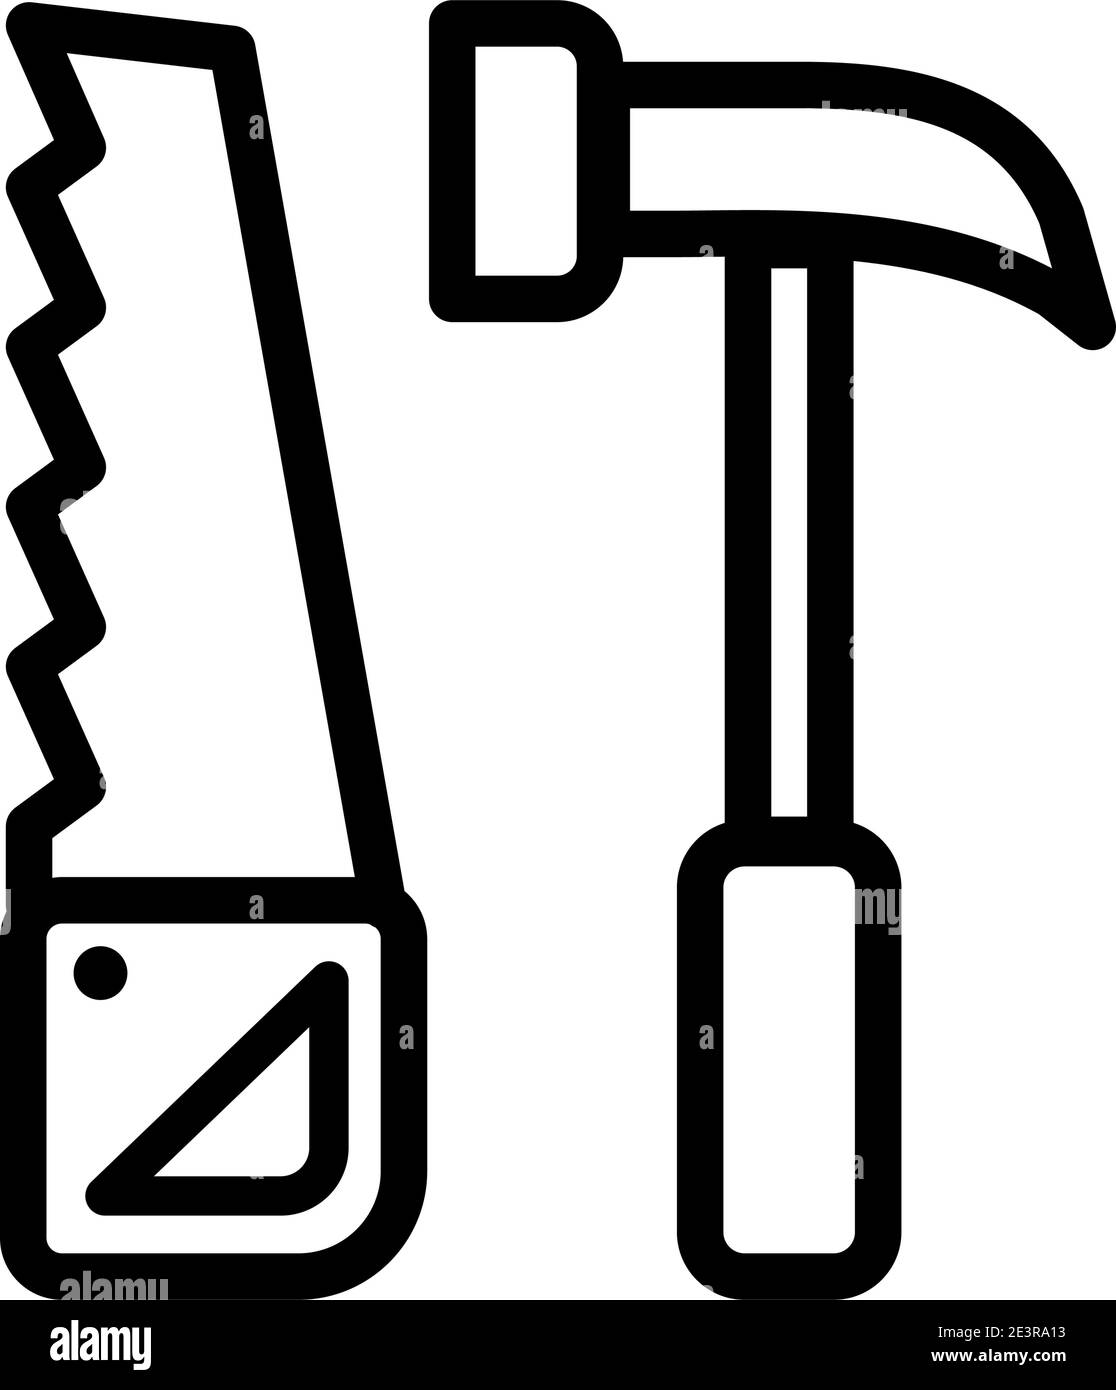 Saw and hammer simple vector icon or logo Stock Vector